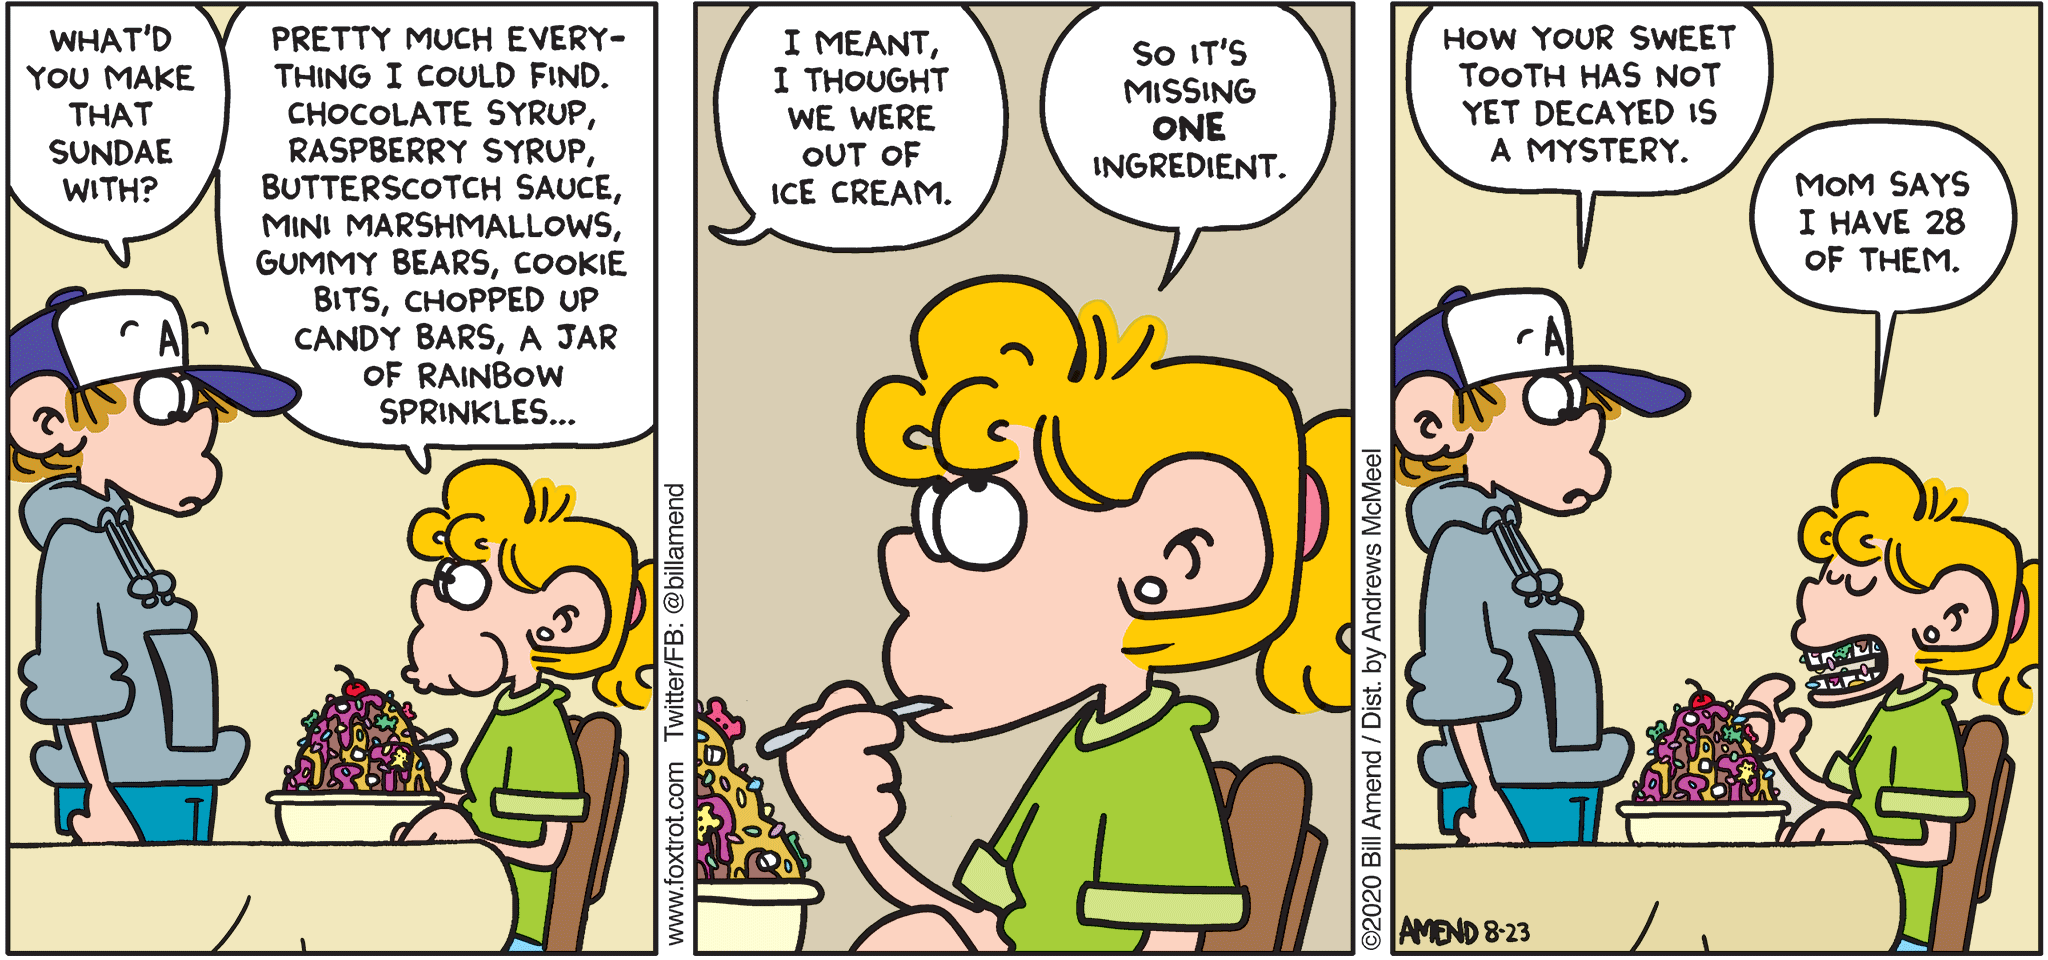 FoxTrot comic strip by Bill Amend - "Sweet Teeth" published August 23, 2020 - Peter Fox: What'd you make that sundae with? Paige Fox: Pretty much everything I could find. Chocolate syrup, raspberry syrup, butterscotch sauce, mini marshmallows, gummy bears, cookie bits, chopped up candy bars, a jar of rainbow sprinkles... Peter Fox: I meant, I thought we were out of ice cream. Paige Fox: So it's missing ONE ingredient. Peter Fox: How your sweet tooth has not yet decayed is a mystery. Paige Fox: Mom says I have 28 of them.